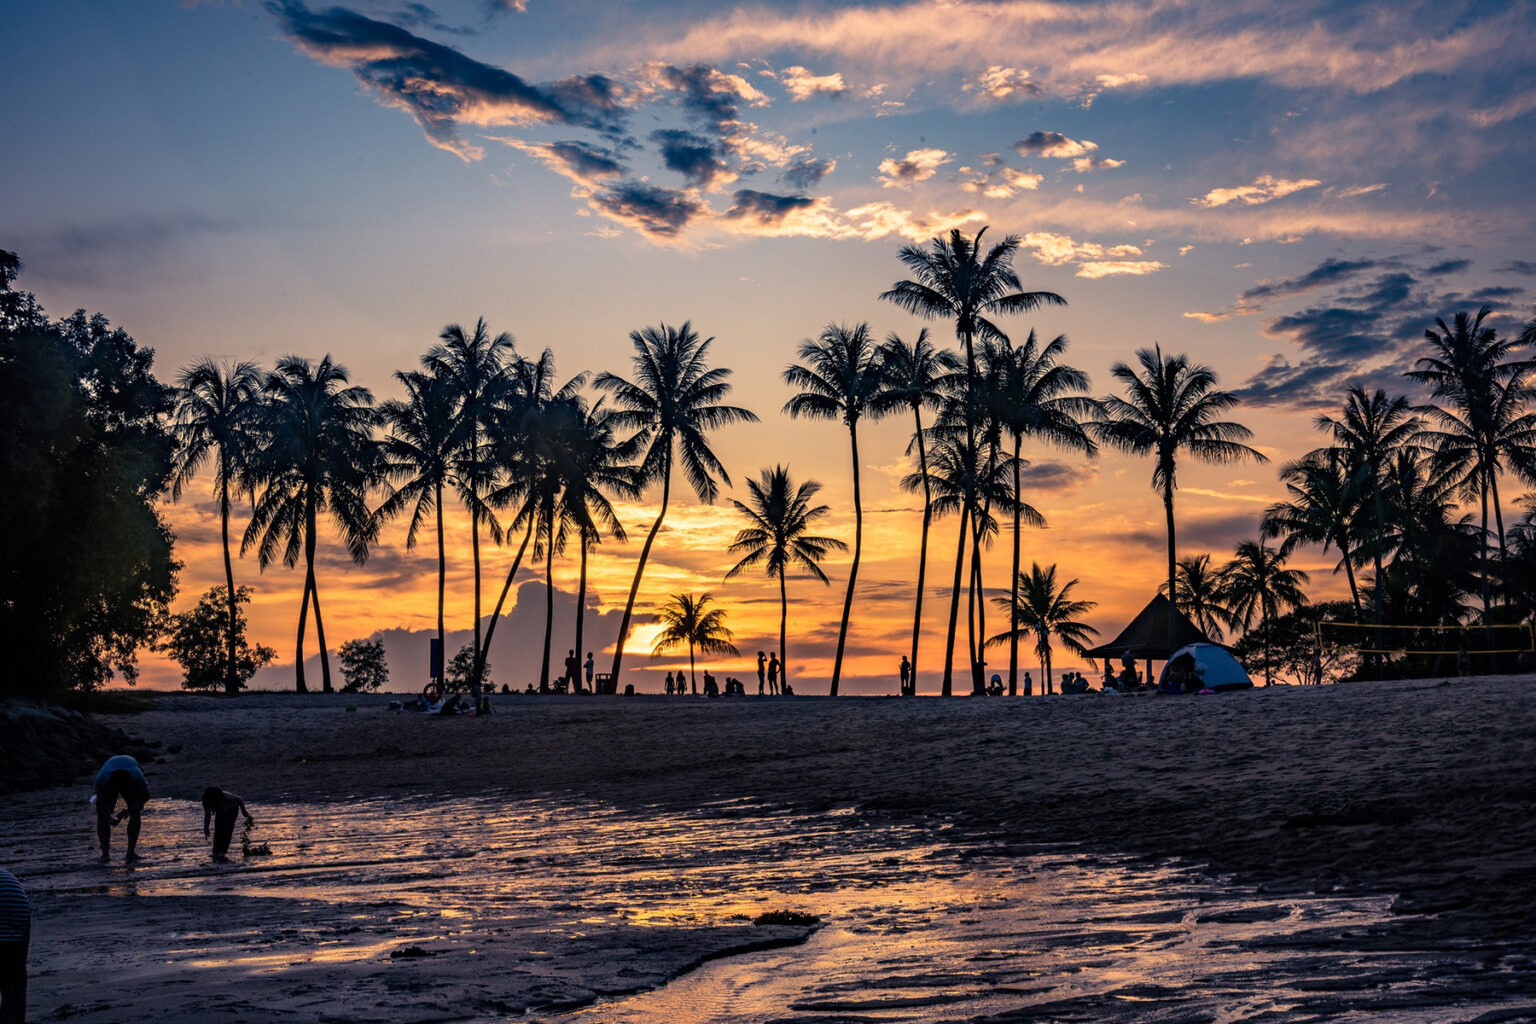 A beach with palm trees at sunset